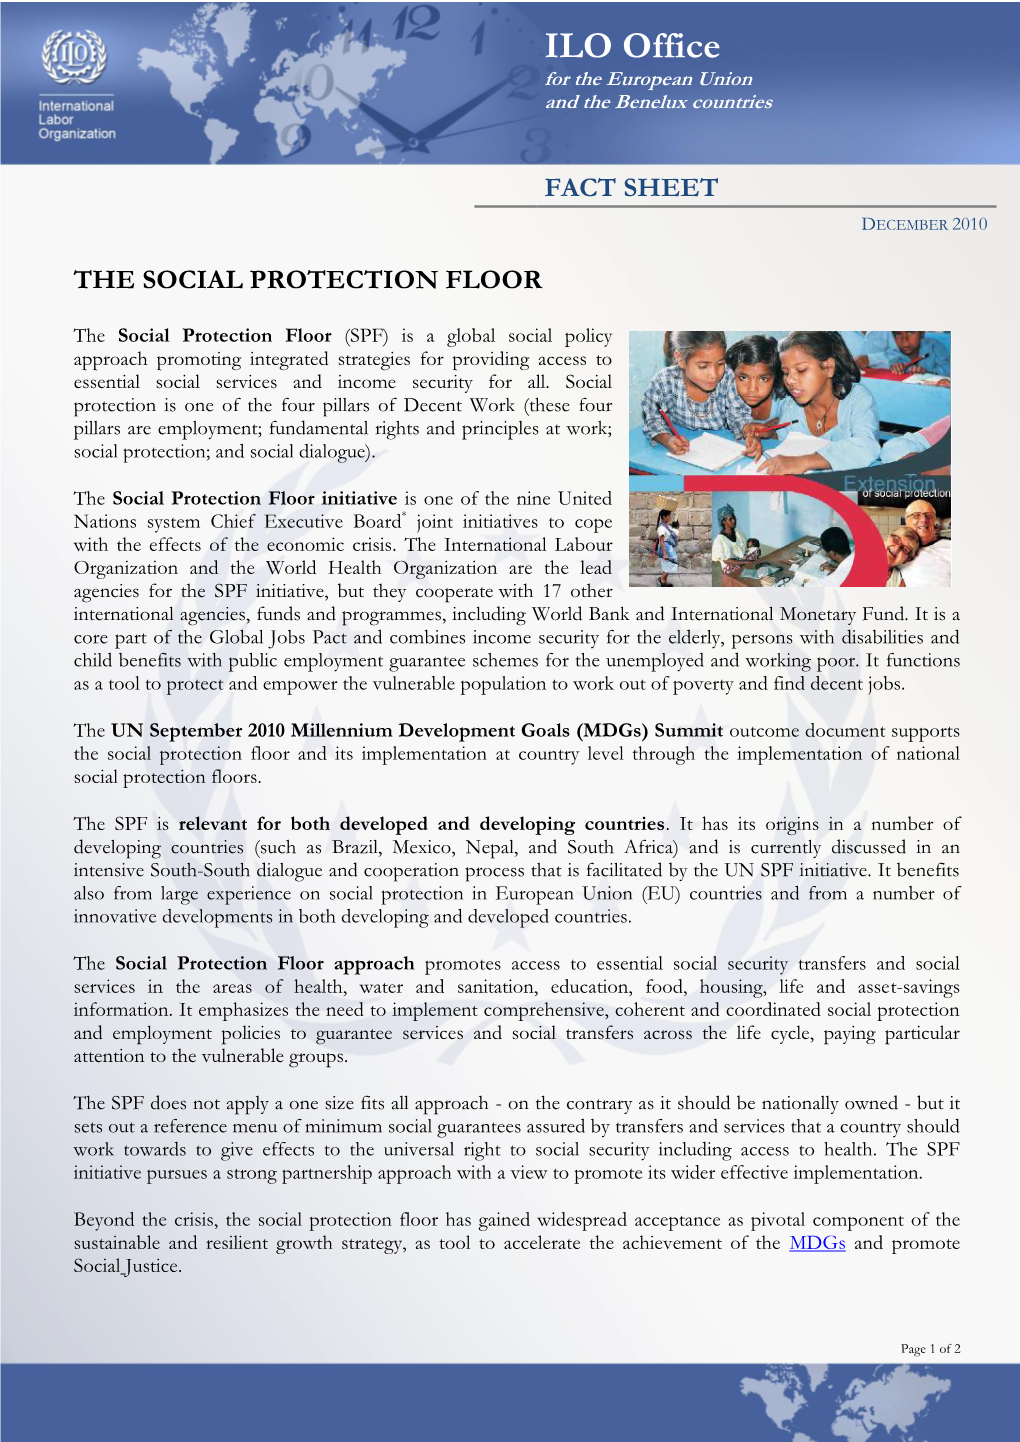 The Social Protection Floor